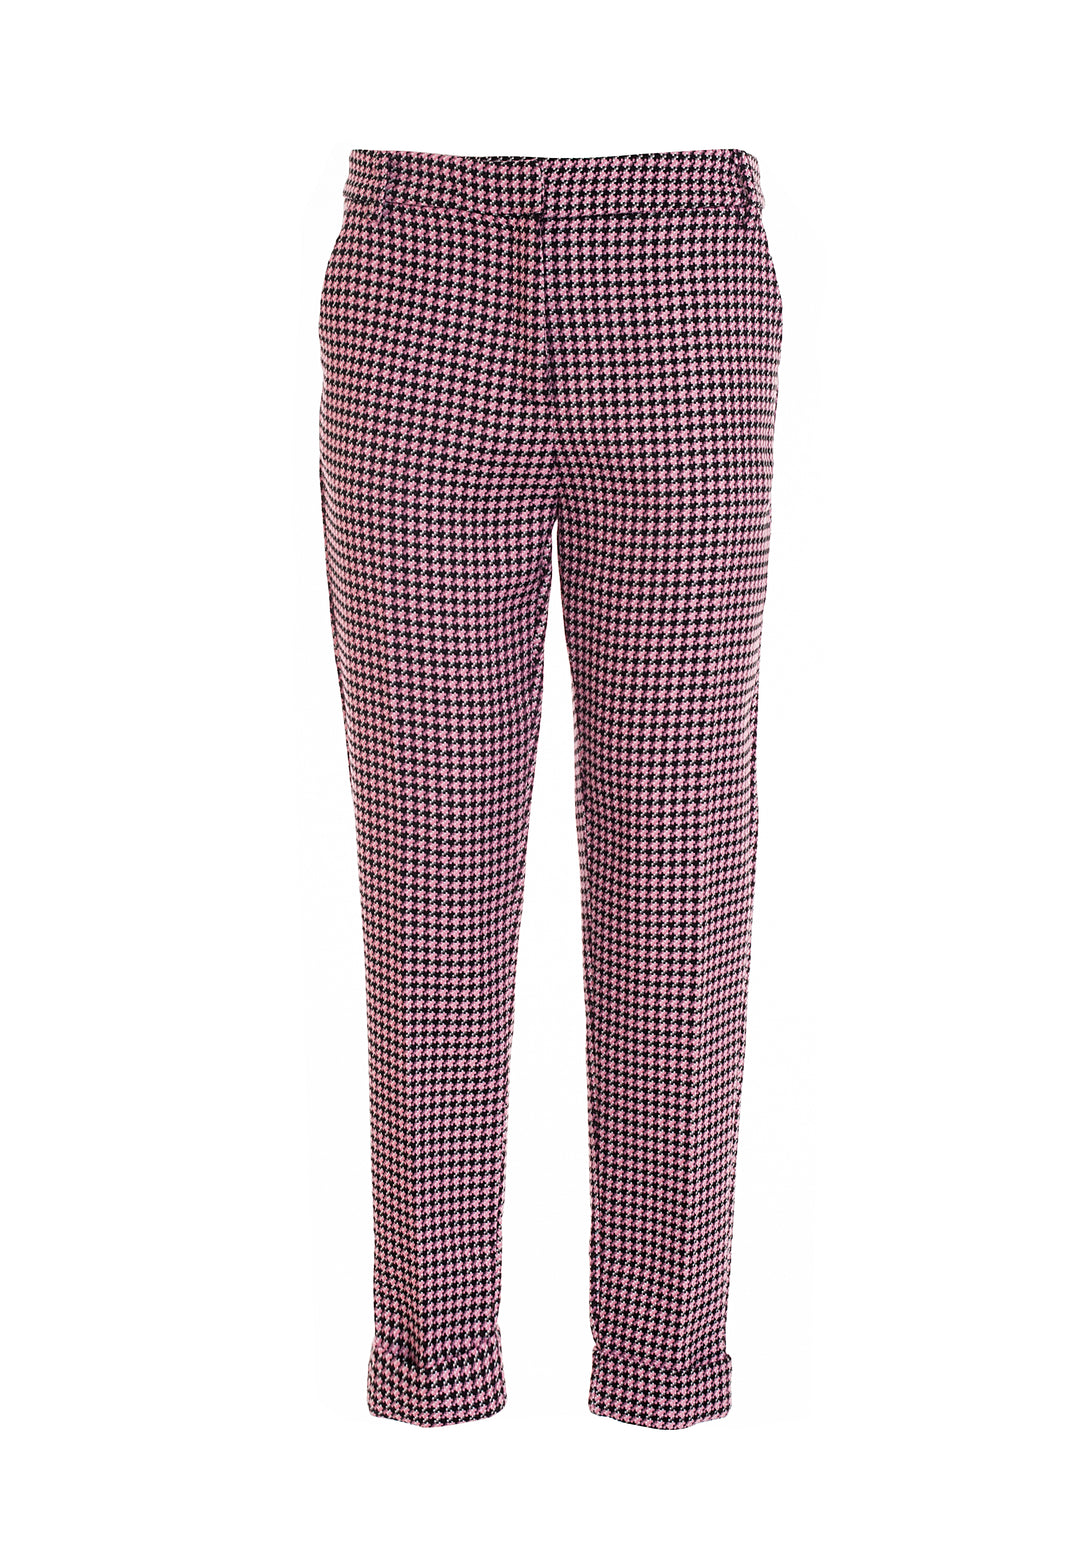 Chinos pant regular fit with pied de poule pattern